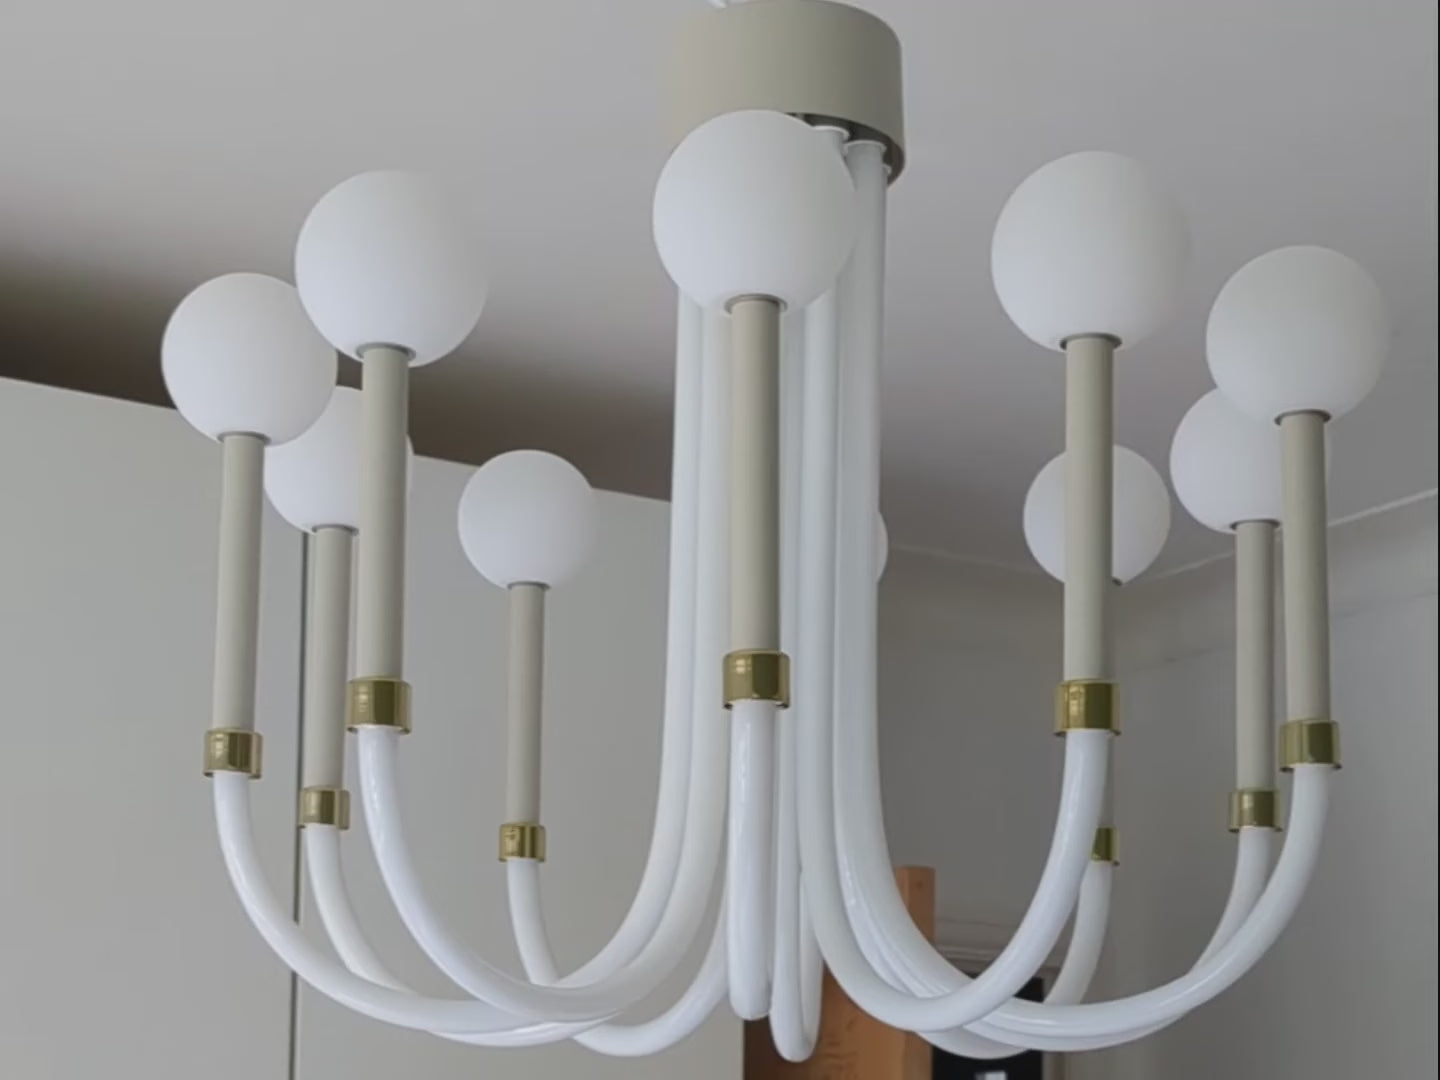 10 opaque sand-coloured glass arms are suspended from a metal ceiling fixture. The curved  sand-coloured U-shaped arms are each topped with an opal glass shade that surrounds a lamp holder. Light is shown in a few room and close ups of the light.